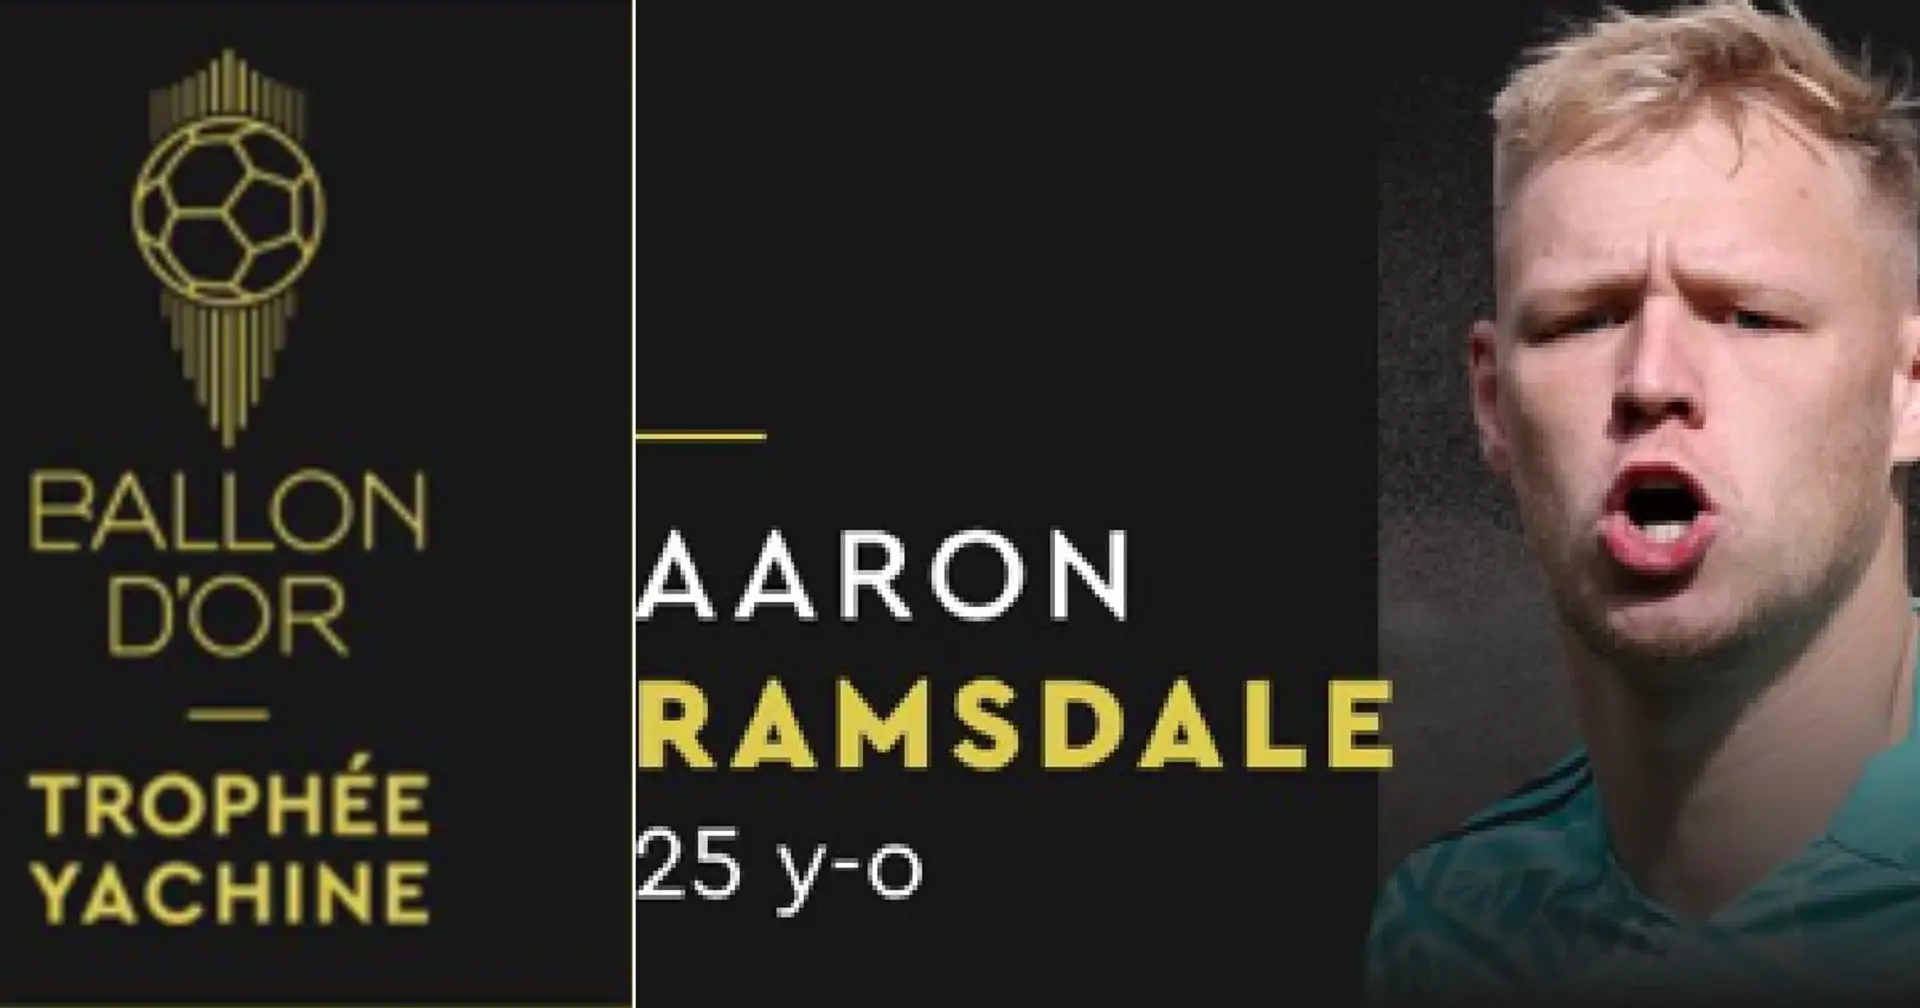 Aaron Ramsdale nominated for Ballon d'Or best goalkeeper award